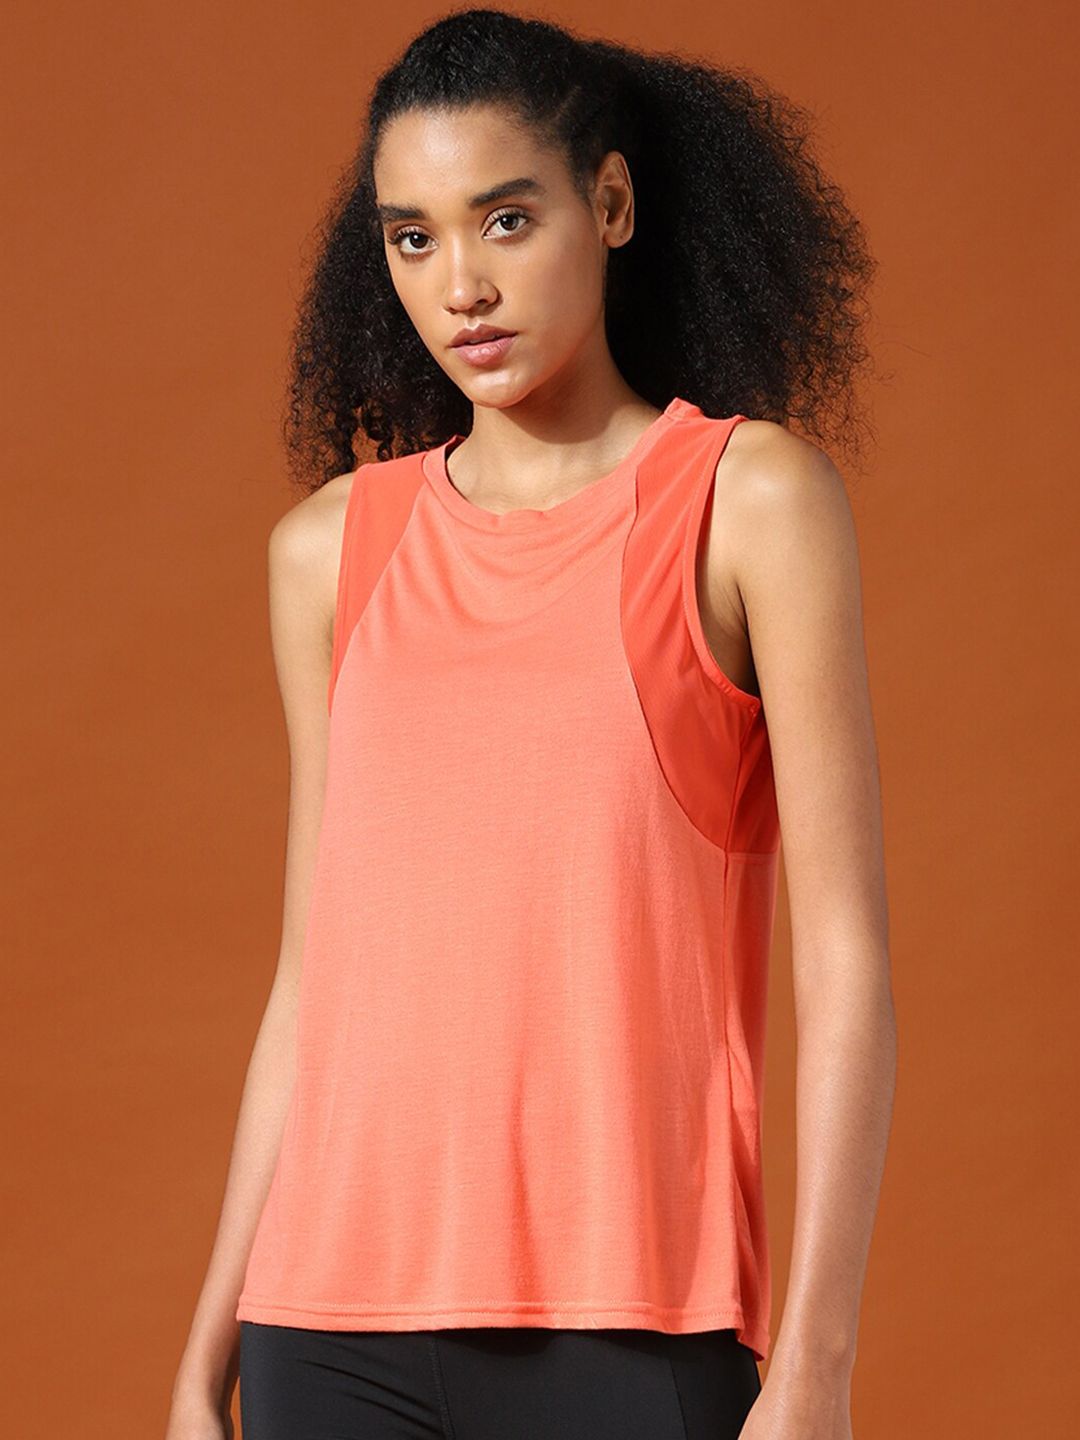 ONLY PLAY Orange Solid Tank Top Price in India